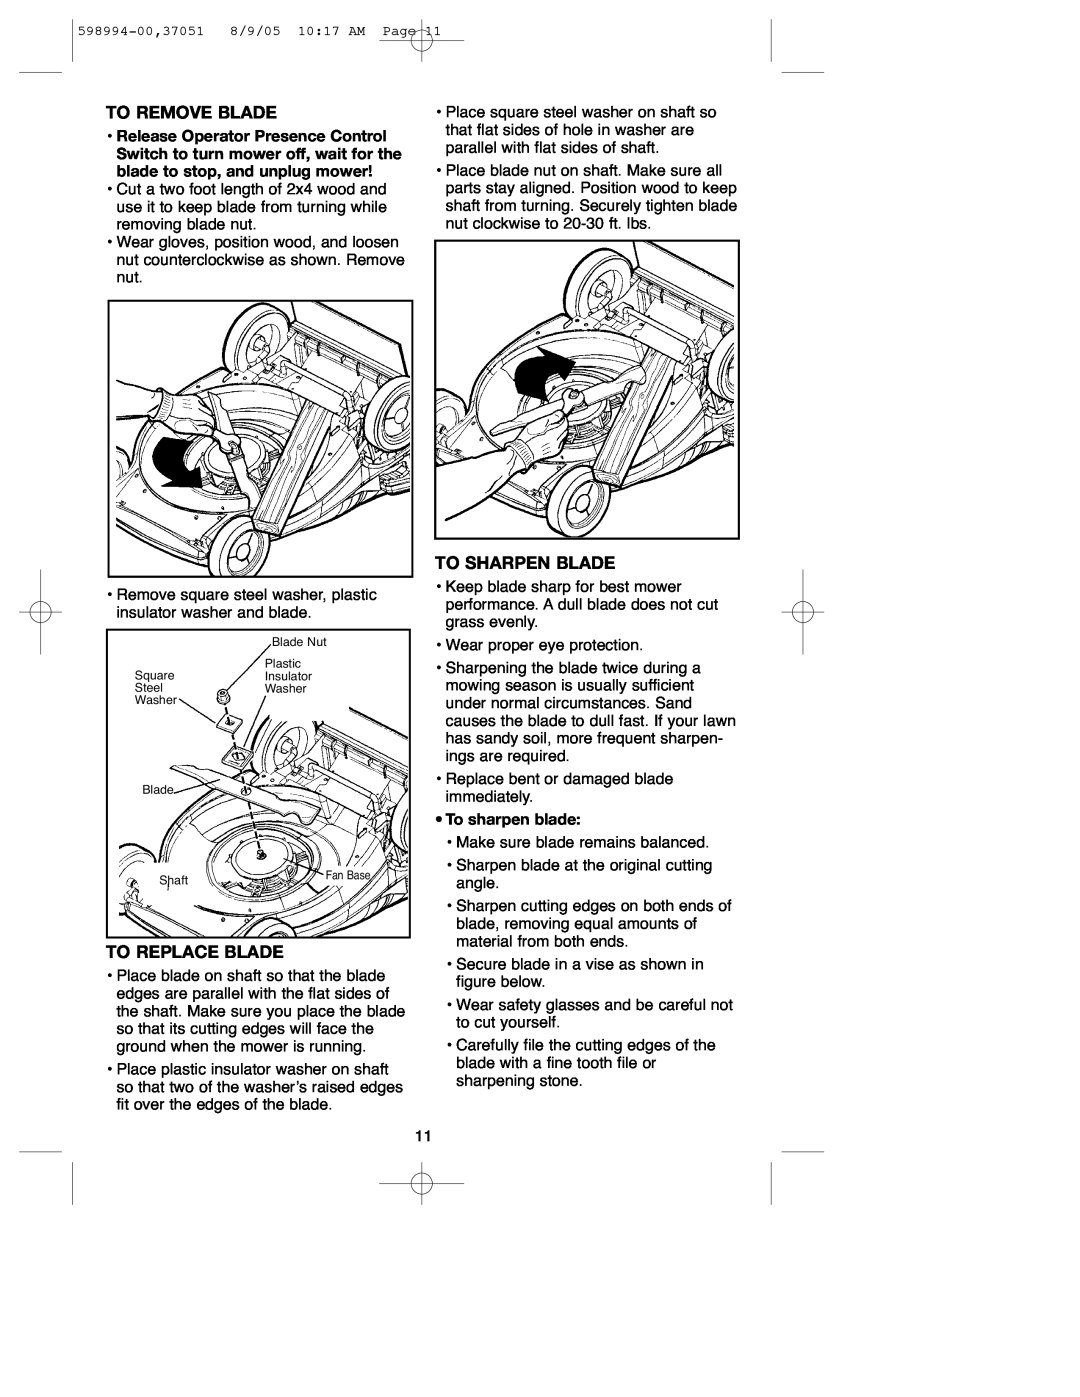 DeWalt 900.37051 instruction manual To Remove Blade, To Replace Blade, To Sharpen Blade, To sharpen blade 